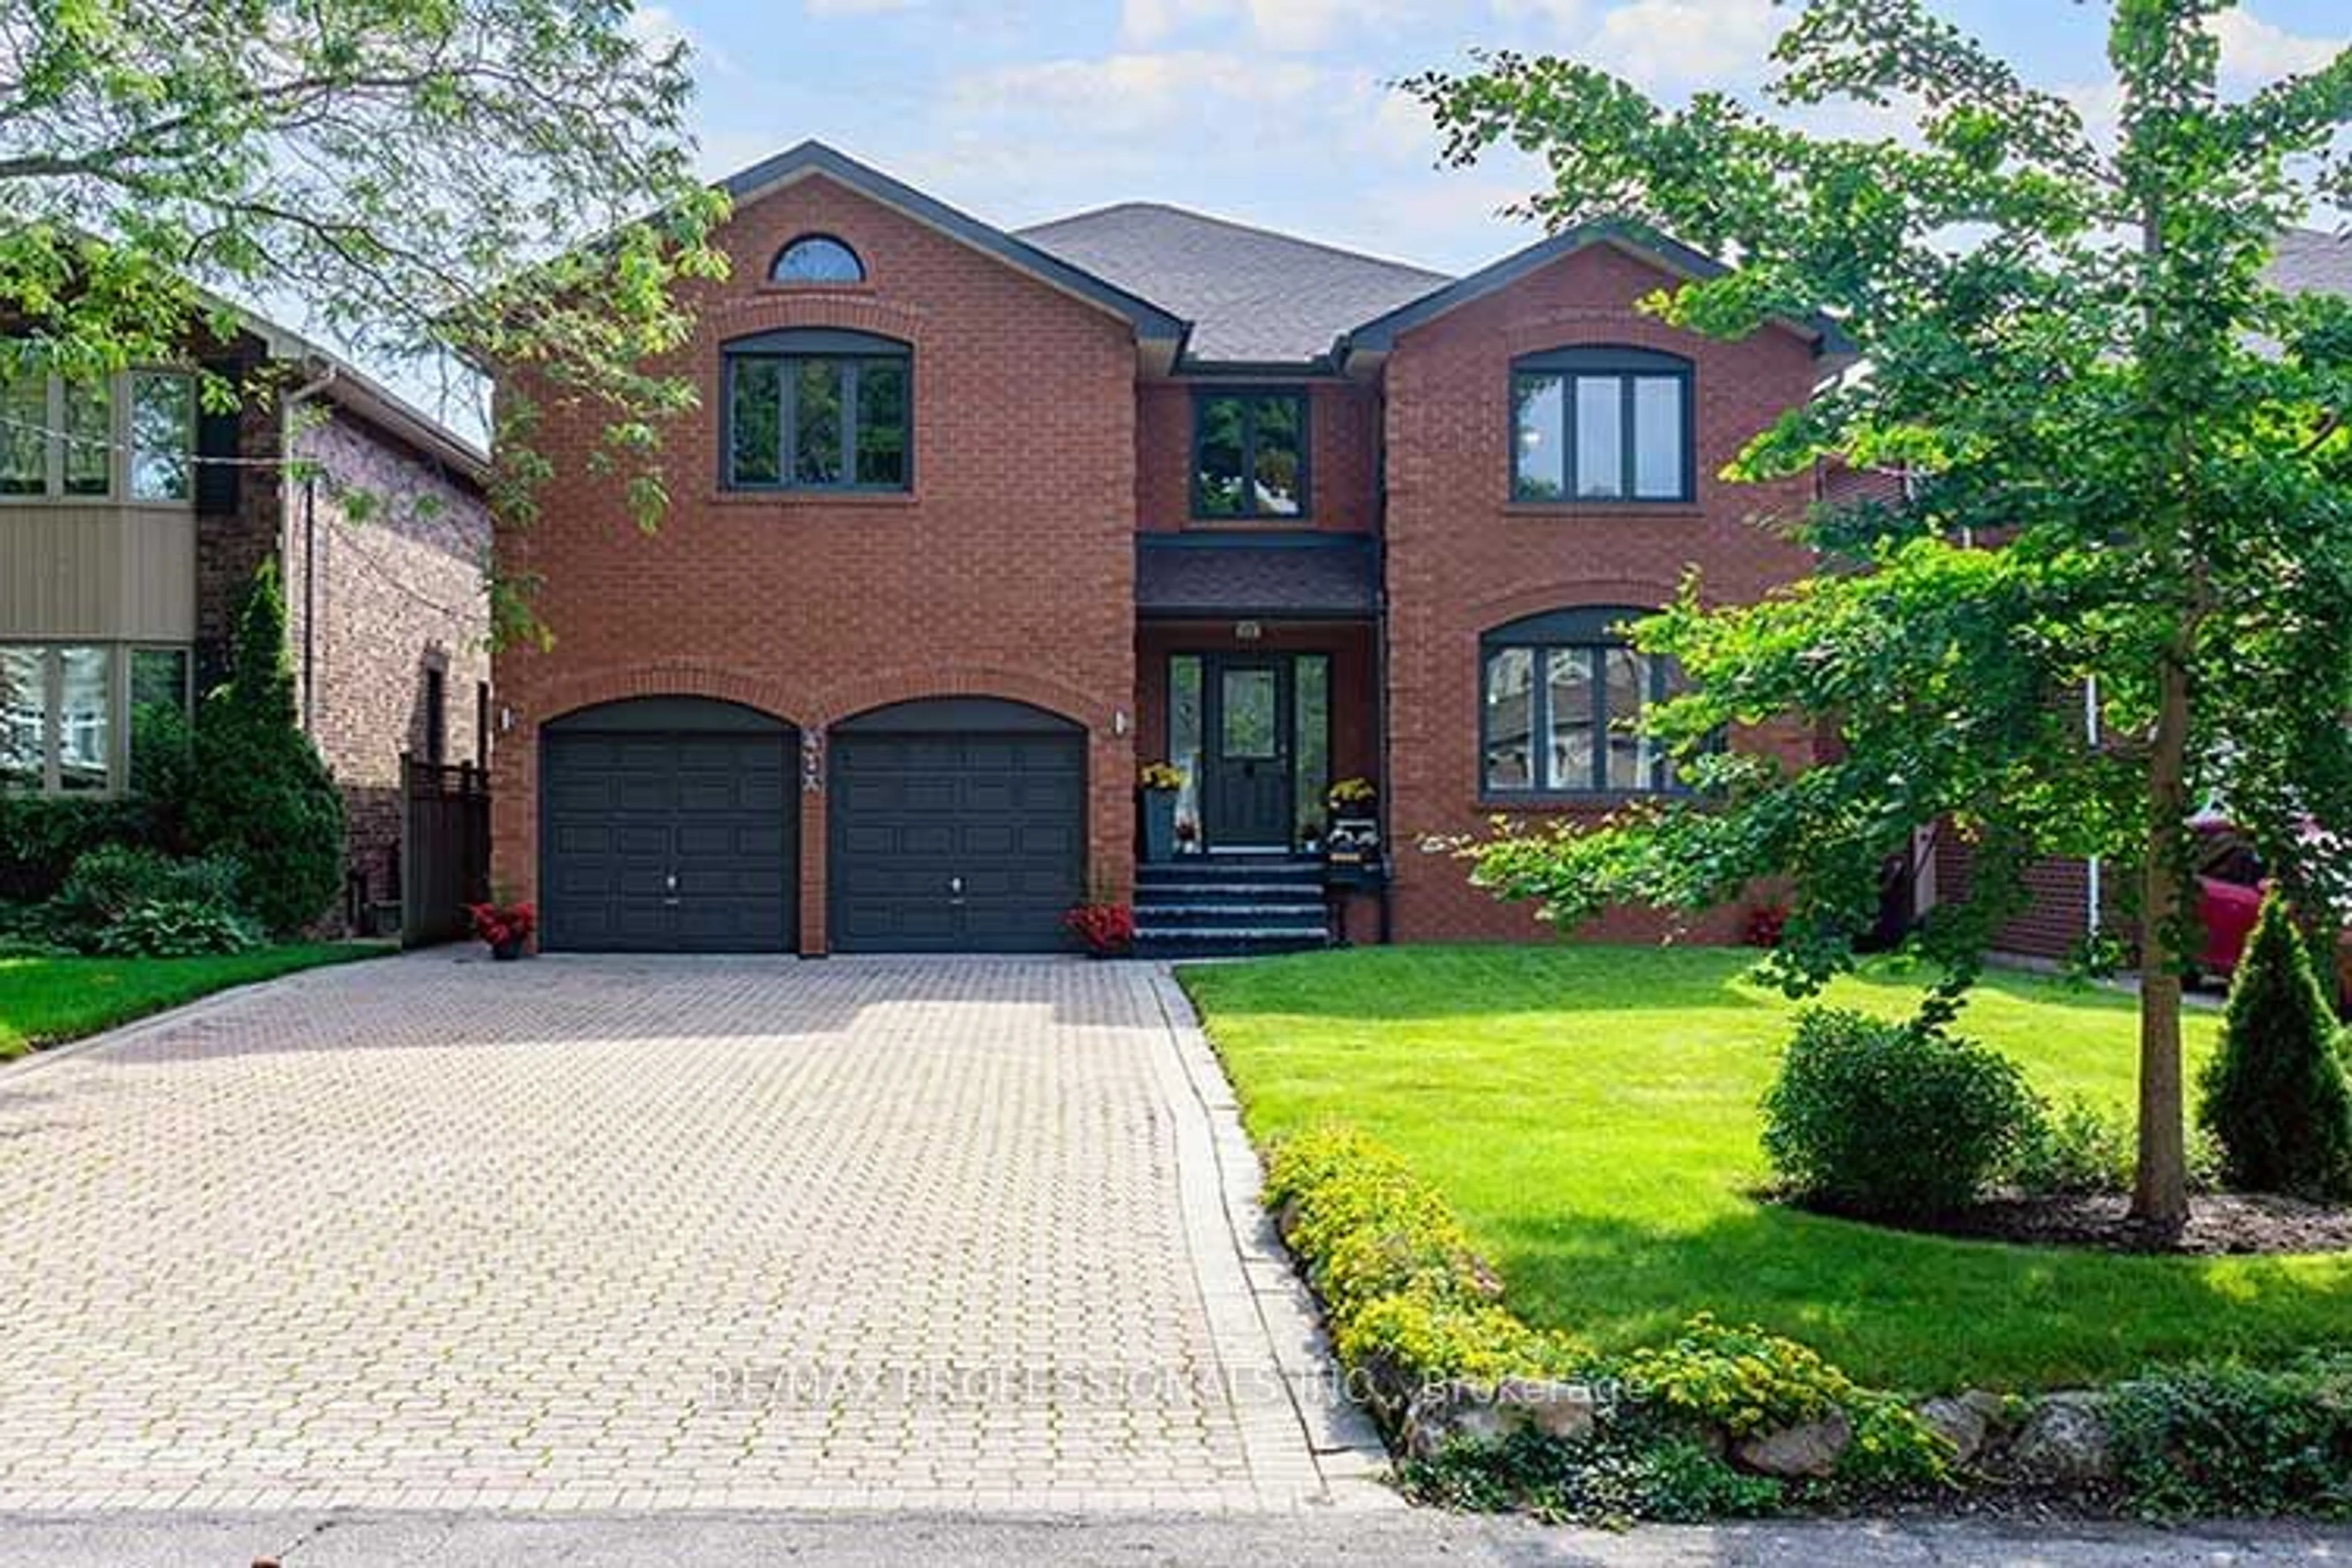 Home with brick exterior material for 41A Durban Rd, Toronto Ontario M8Z 4B4